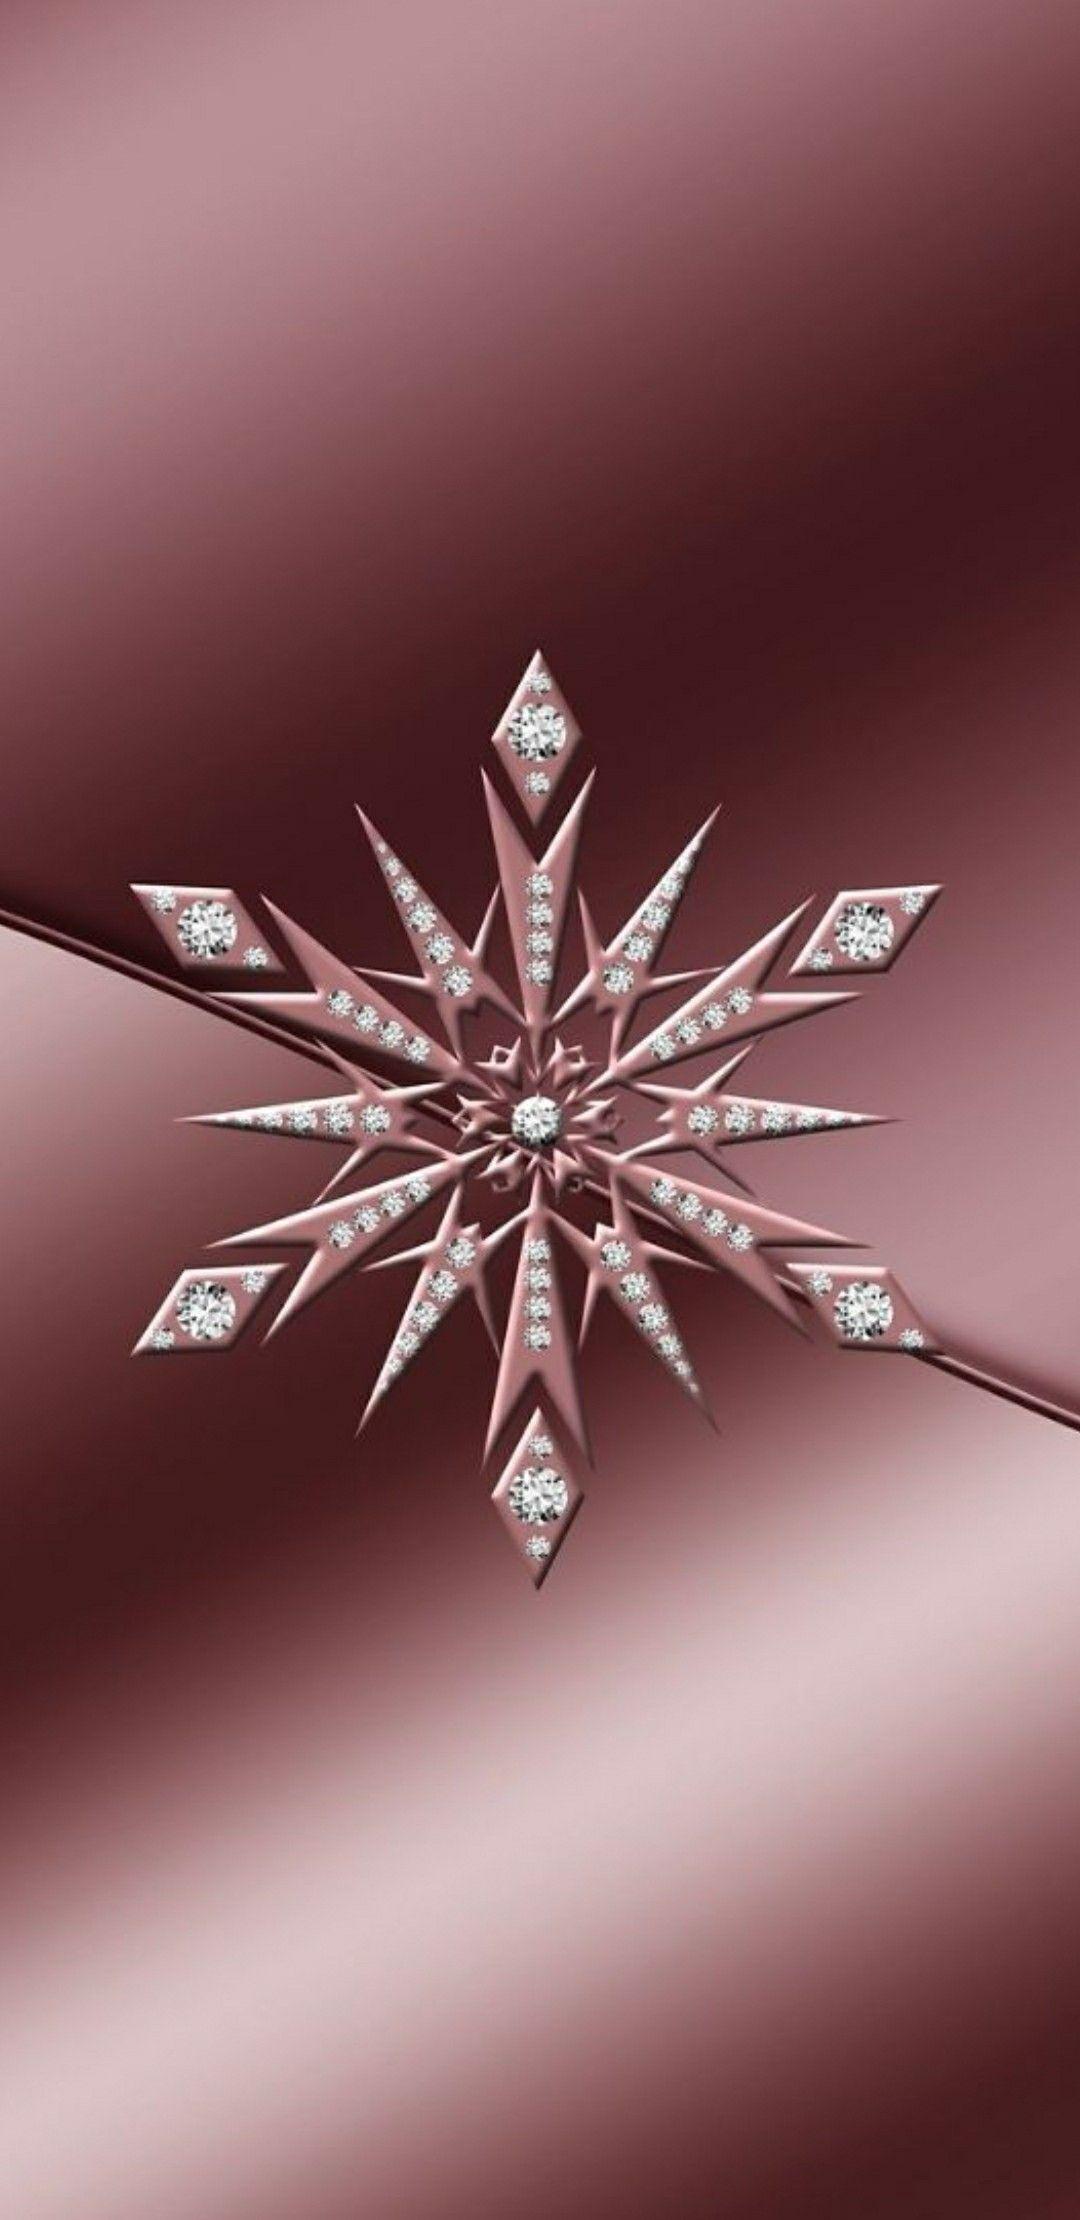 Pink Snowflakes Winter Christmas Background Rose Gold